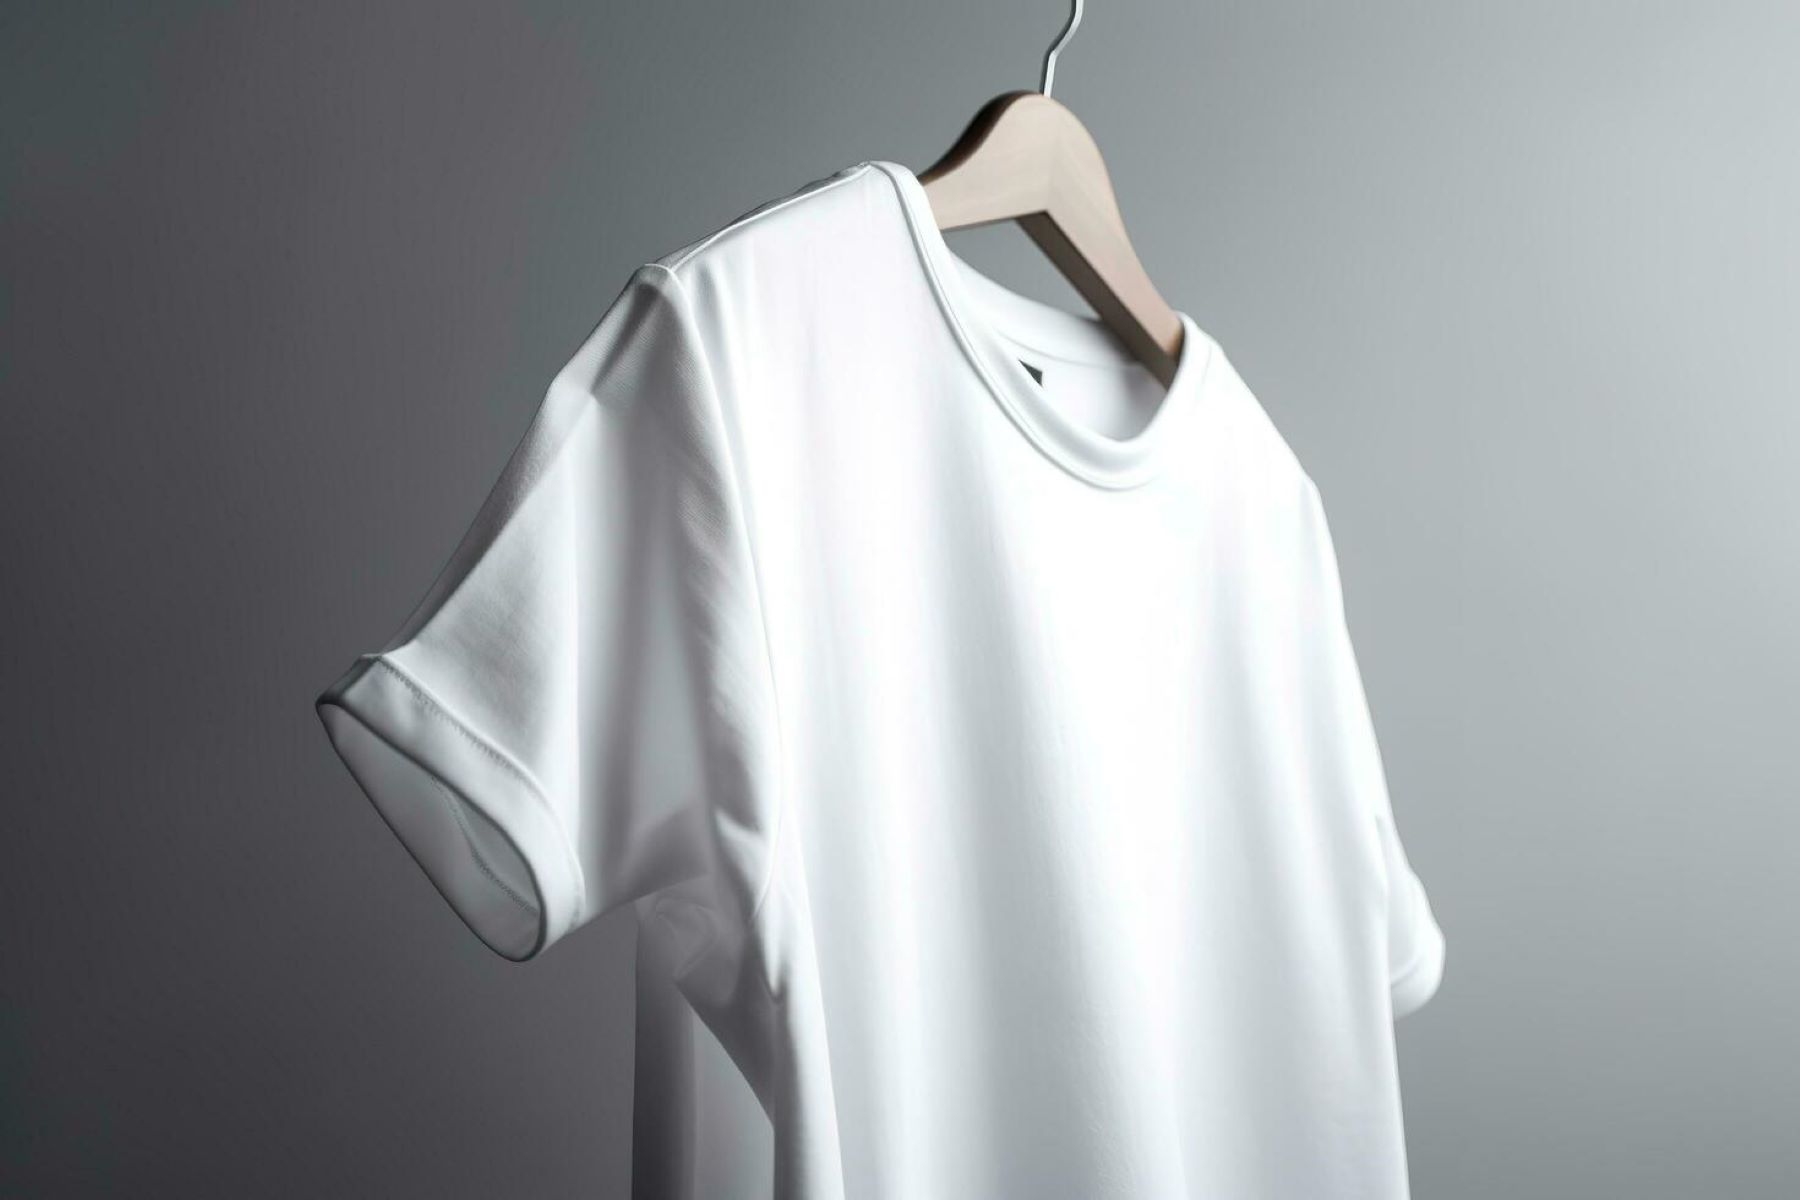 The Surprising Reason Wealthy Individuals Splurge On $400 Plain White T-Shirts - You Won't Believe It!